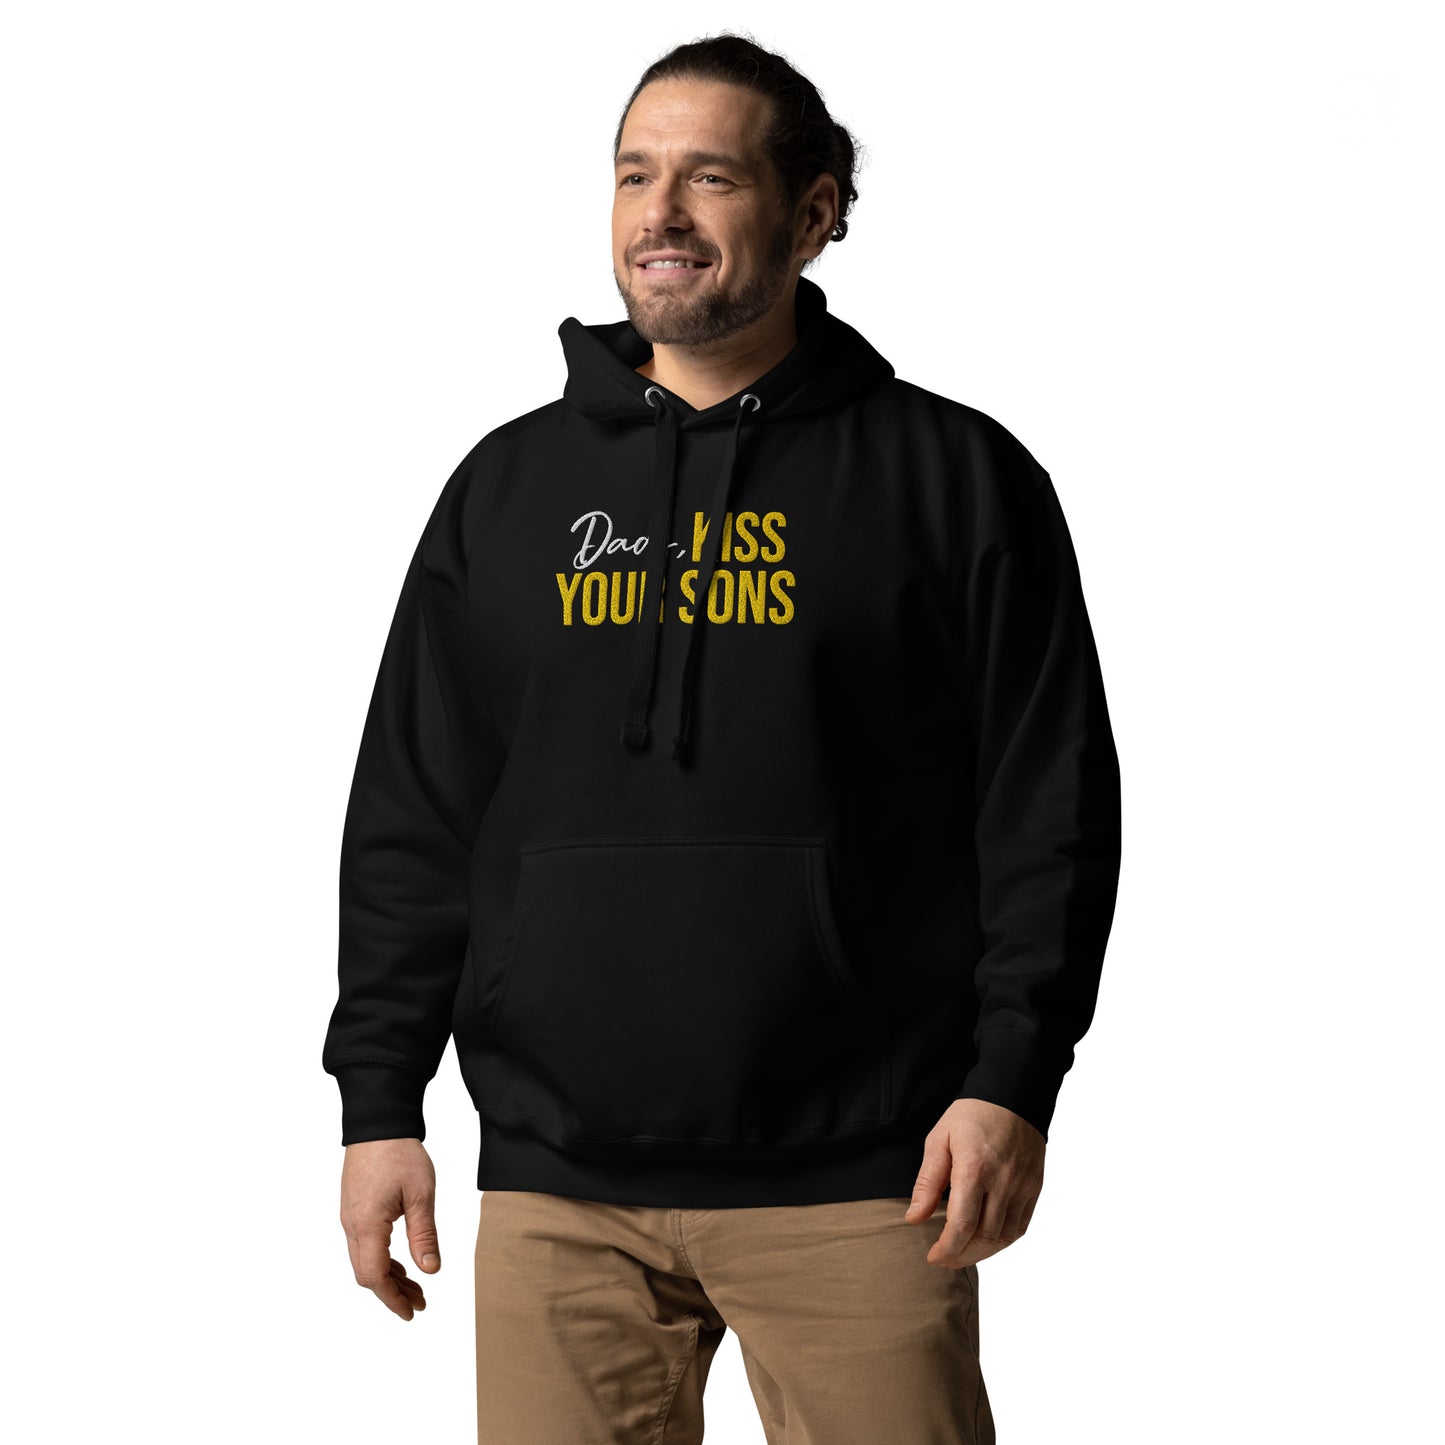 Dads, Kiss Your Sons Unisex Hoodie (embroidered)